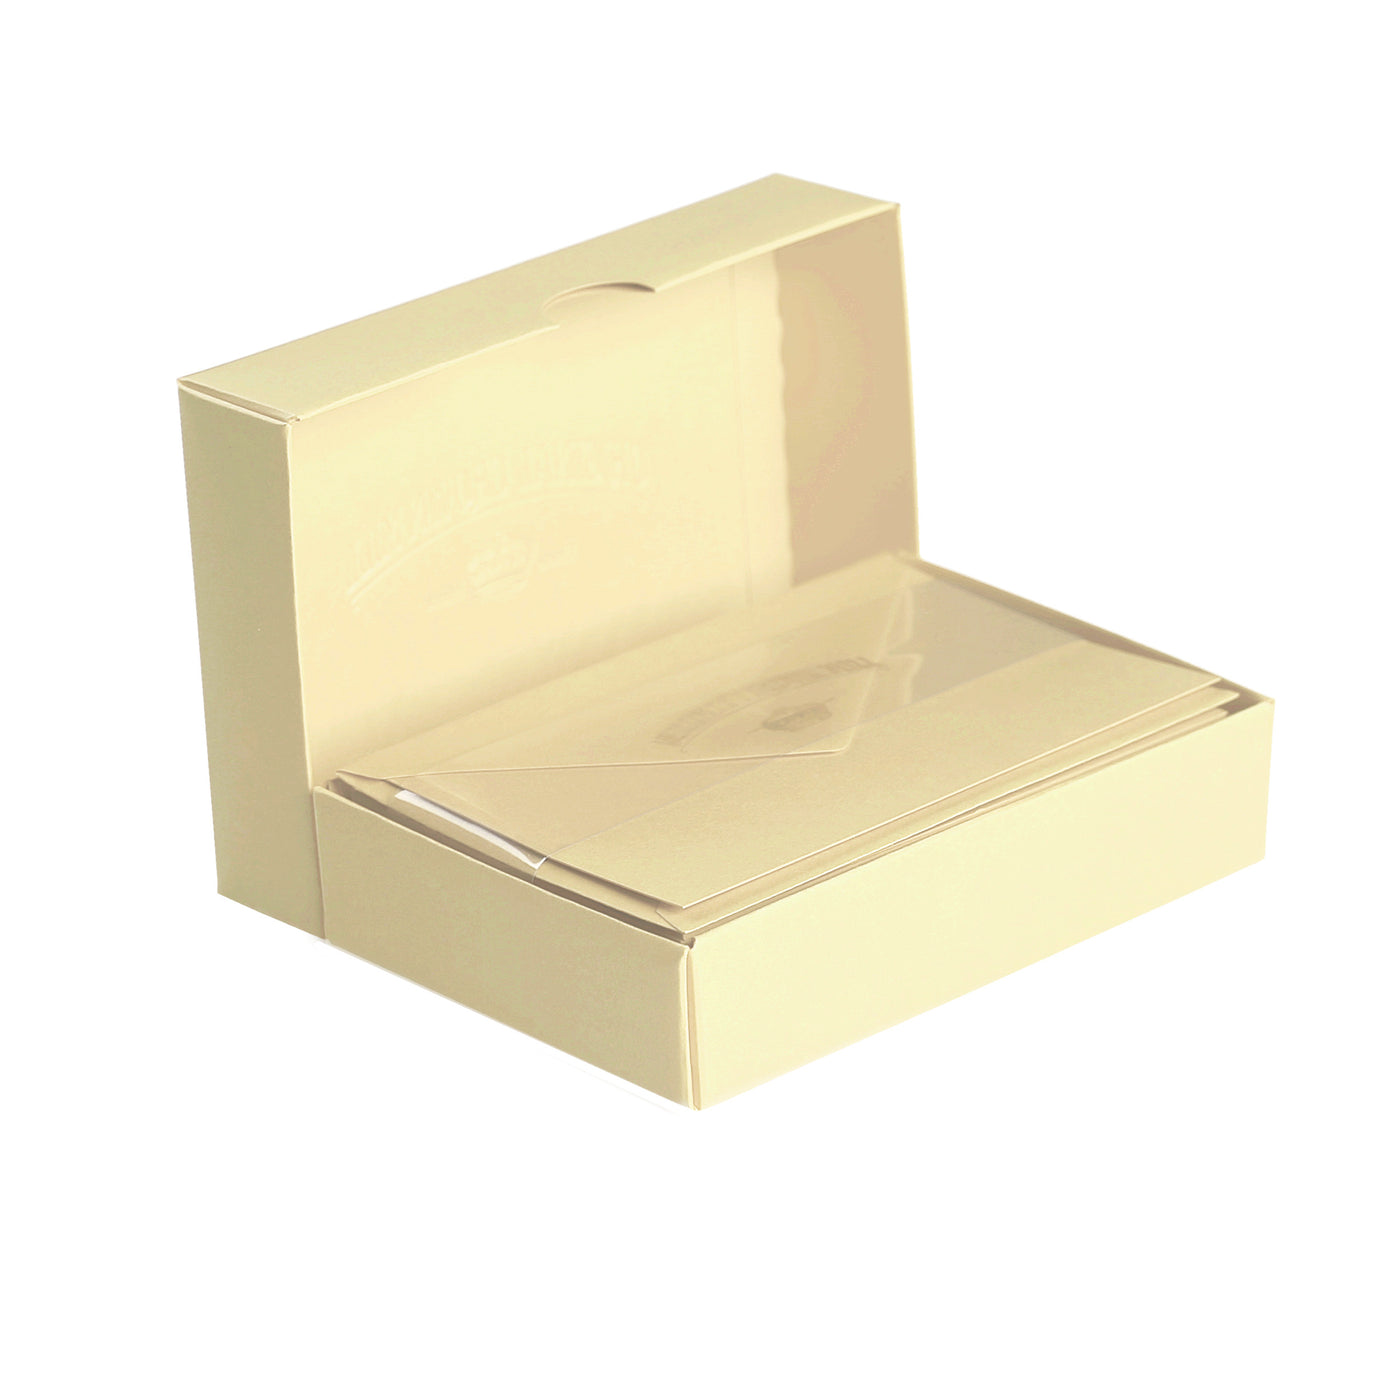 Vellum Stationery Set - Smooth Finish, Flat Card - 3 1/2" x 5 1/2" - Butter | Atlas Stationers.